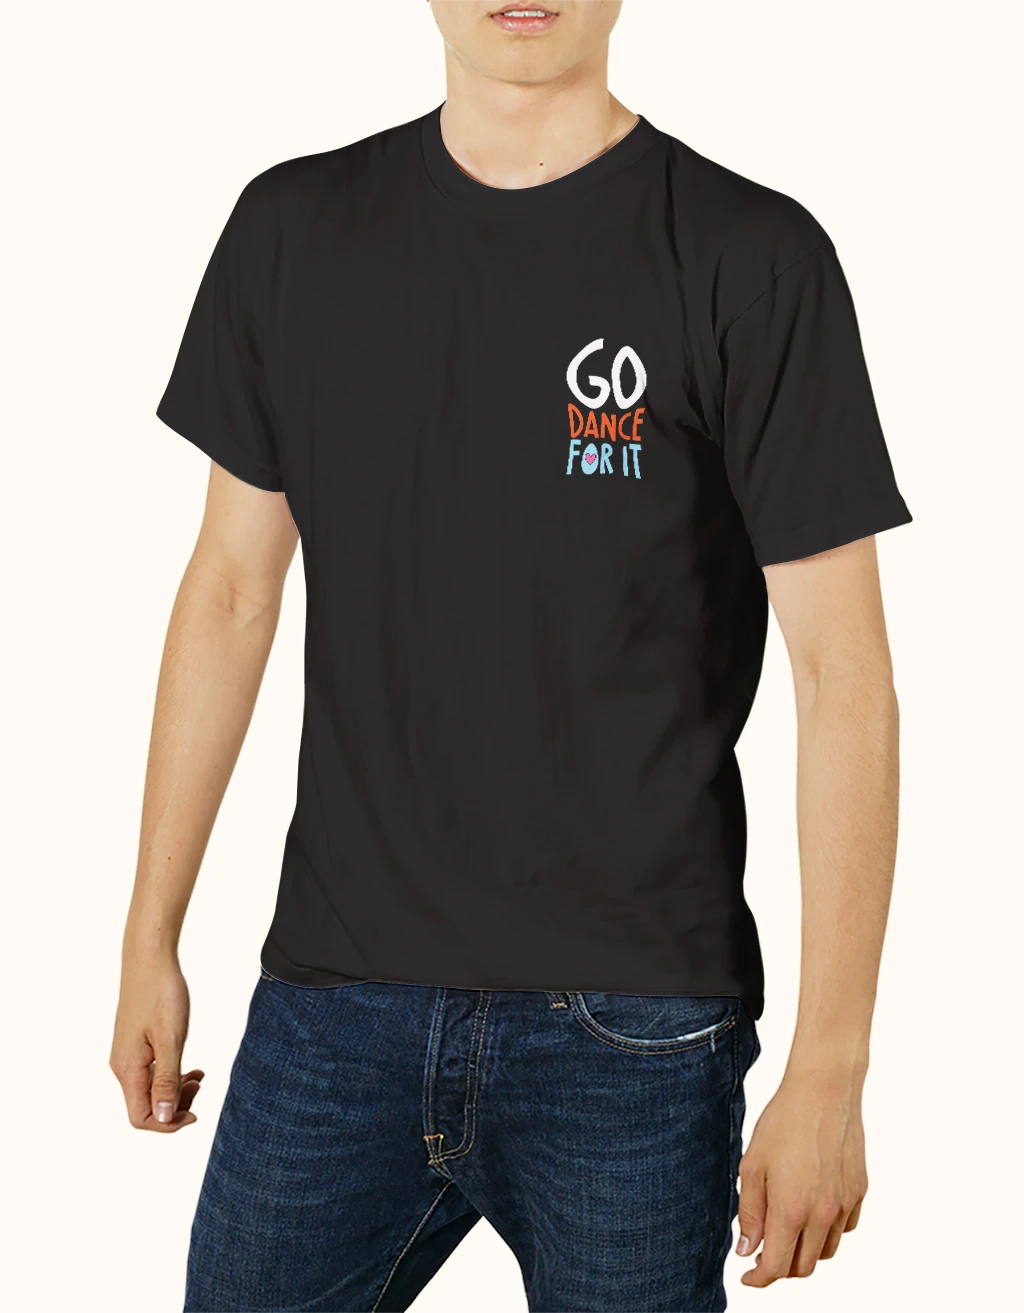 buy go dance for it black t shirt online at best price